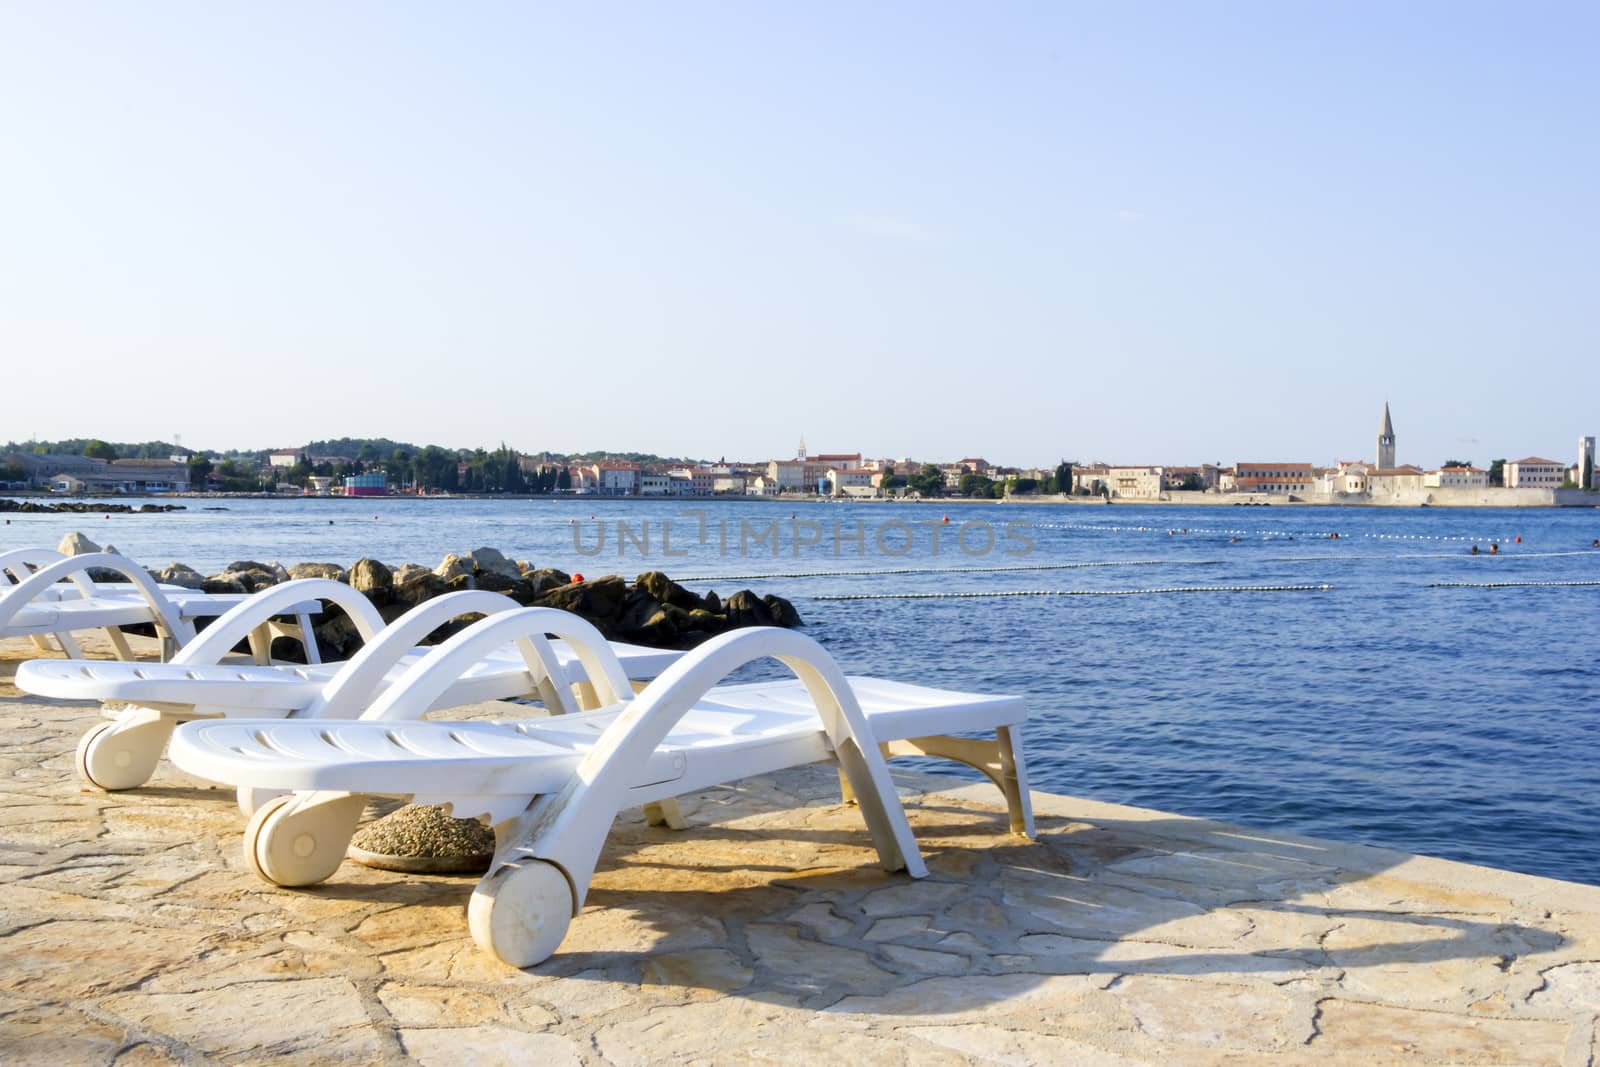 The beach in Porec in the morning, in the light of the rising sun